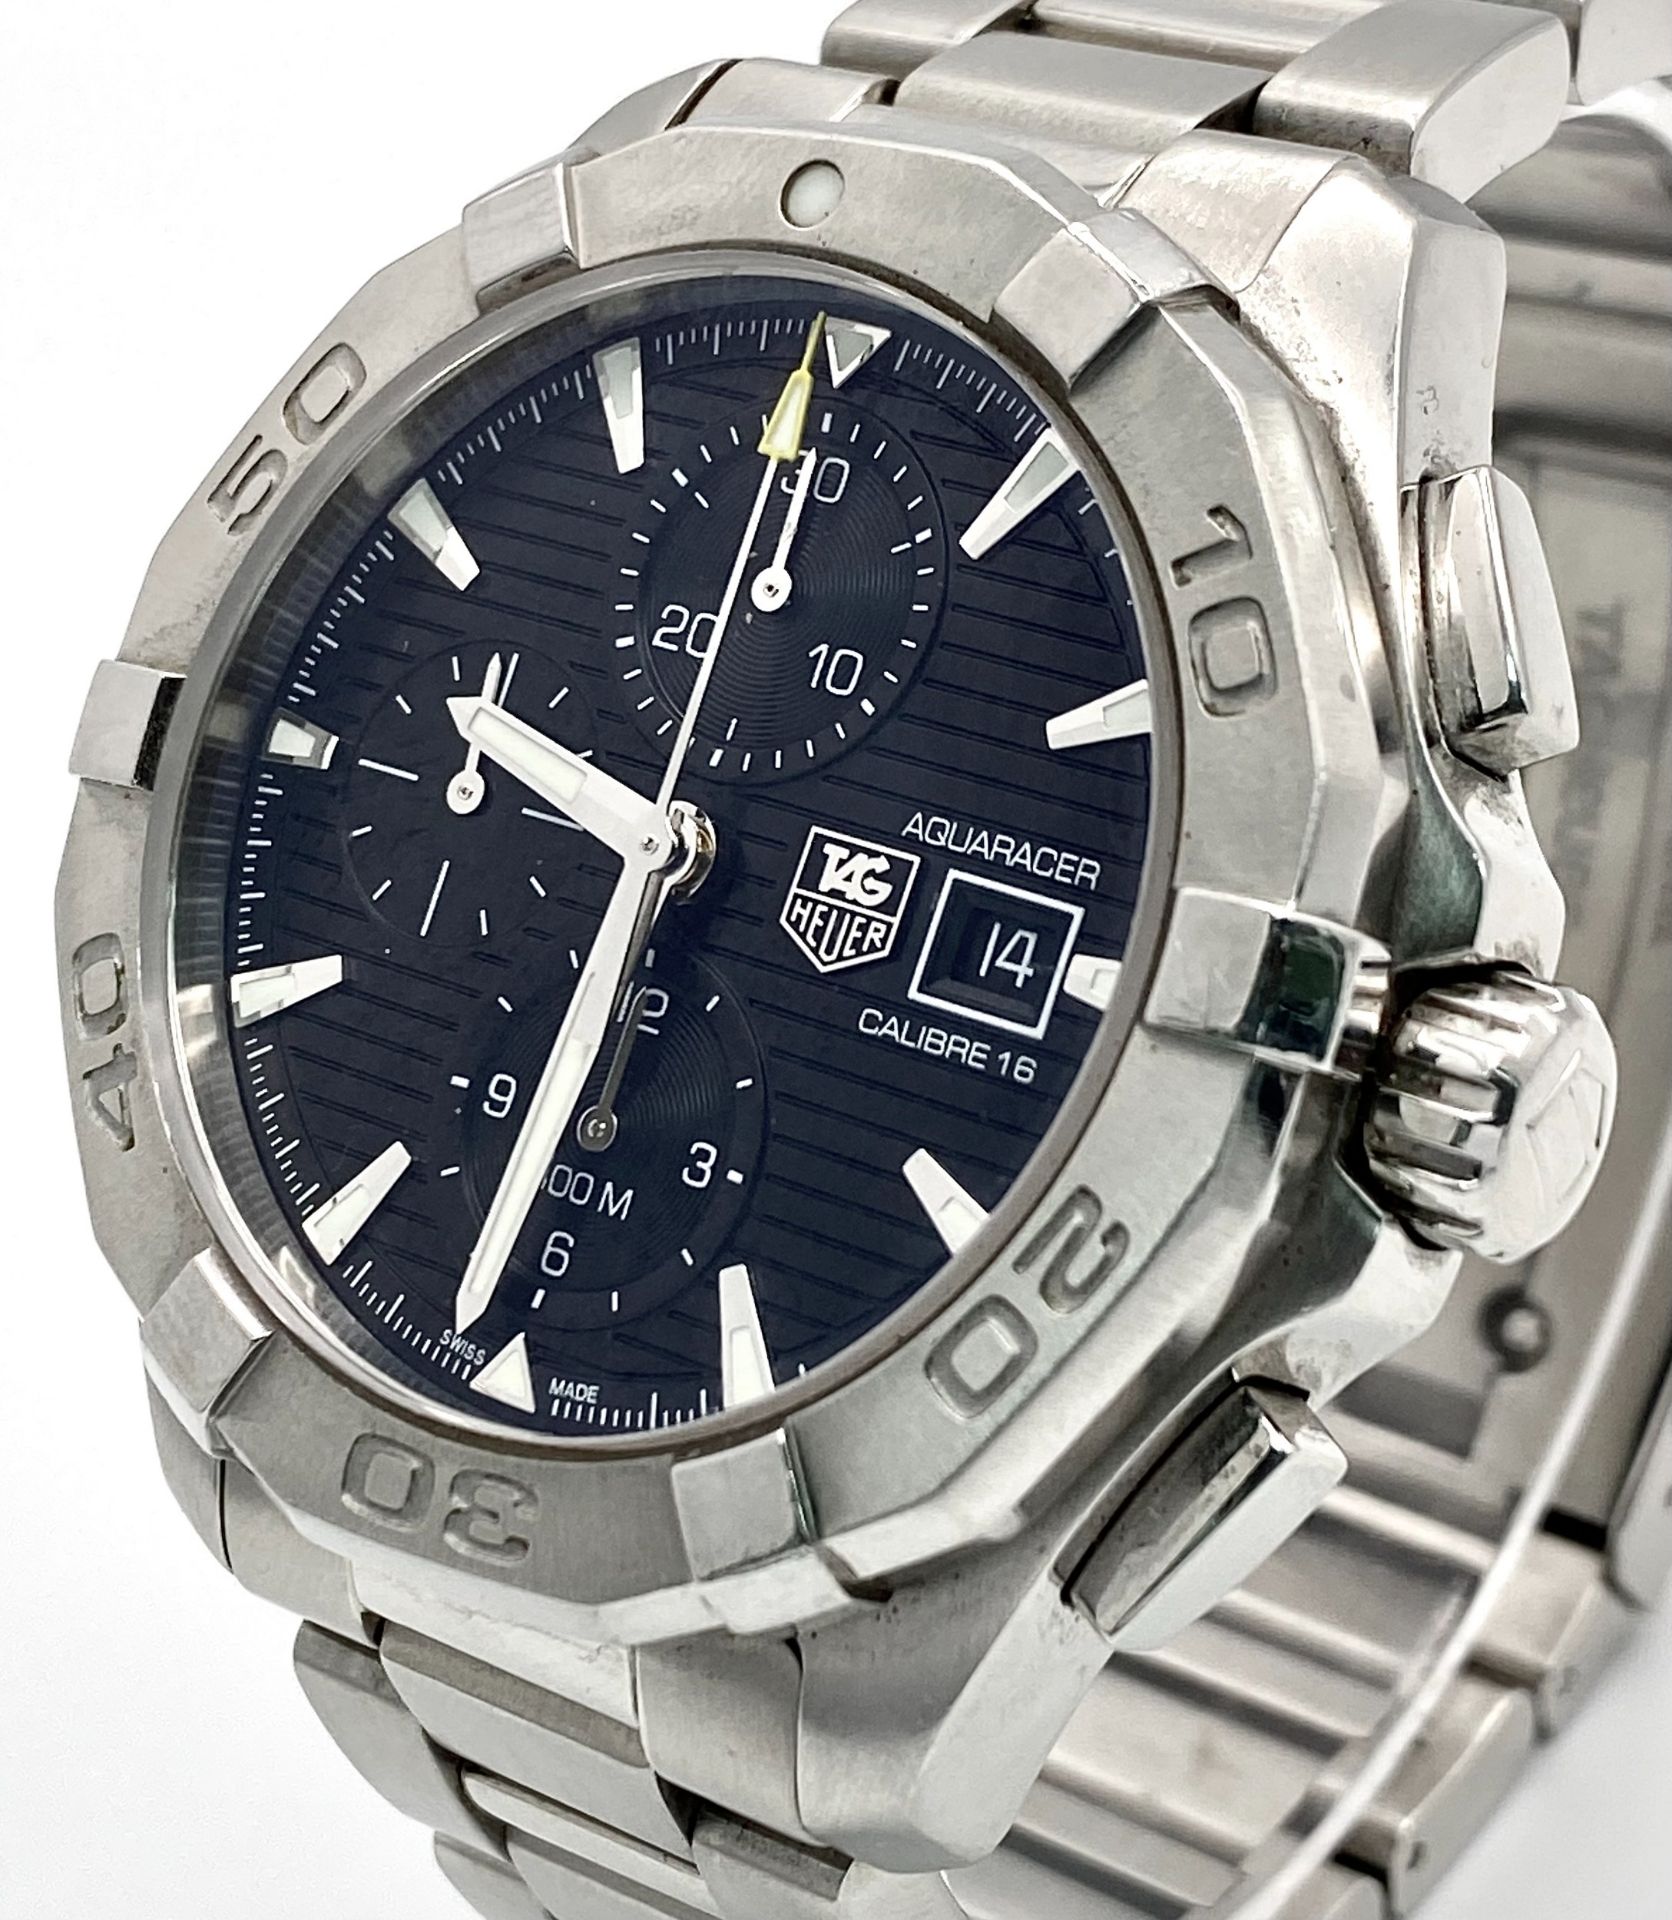 A TAG HEUER AQUARACER CALIBRE 16 AUTOMATIC GENTS WATCH - STAINLESS STEEL BRACELET AND CASE - 44MM. - Image 3 of 9